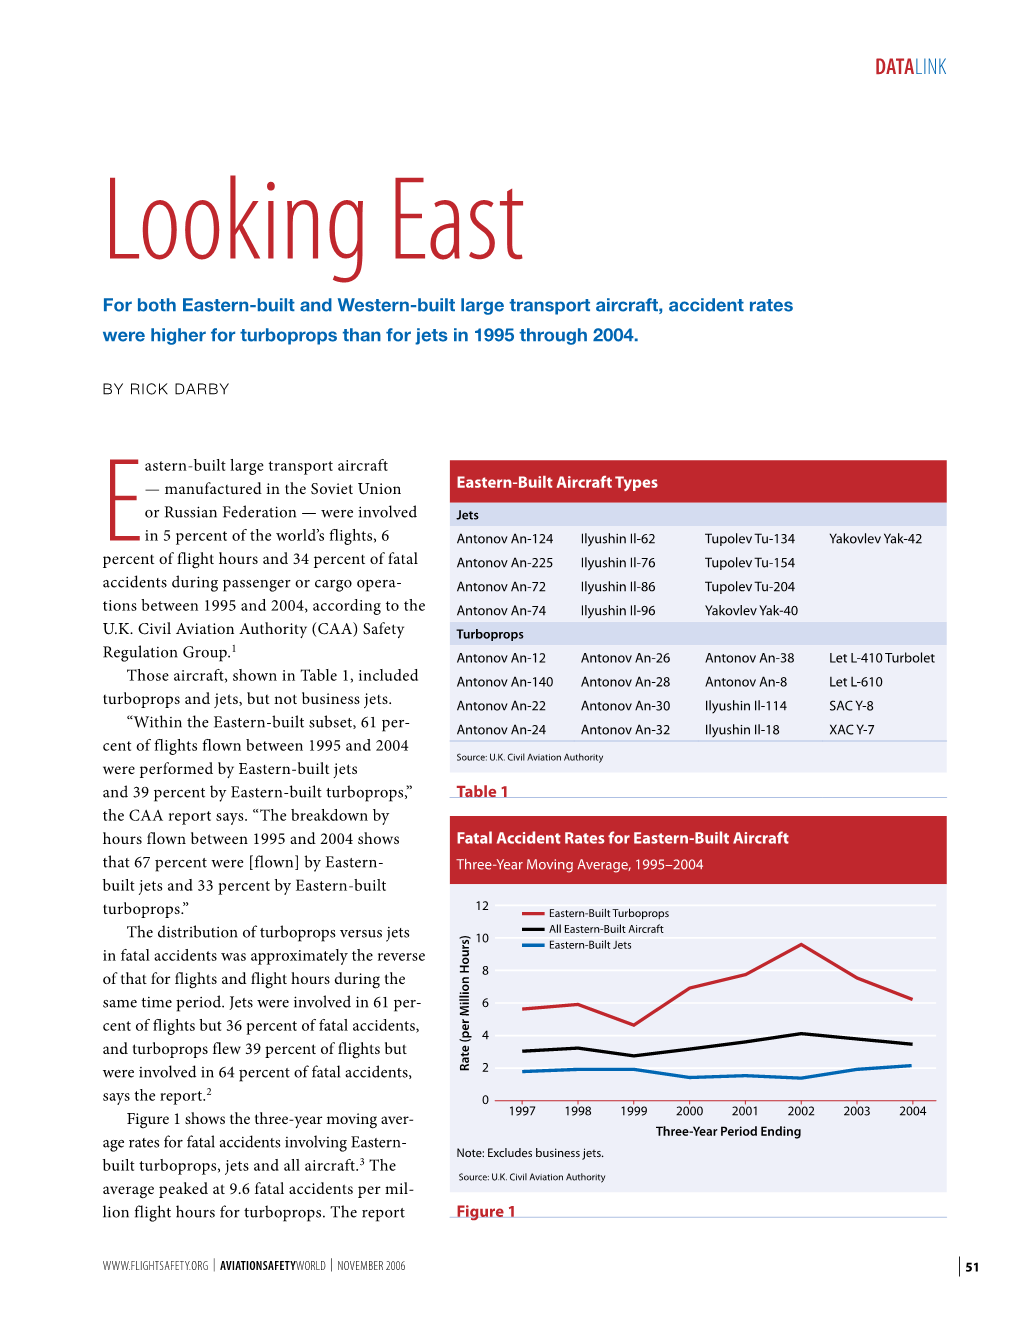 Looking East for Both Eastern-Built and Western-Built Large Transport Aircraft, Accident Rates Were Higher for Turboprops Than for Jets in 1995 Through 2004